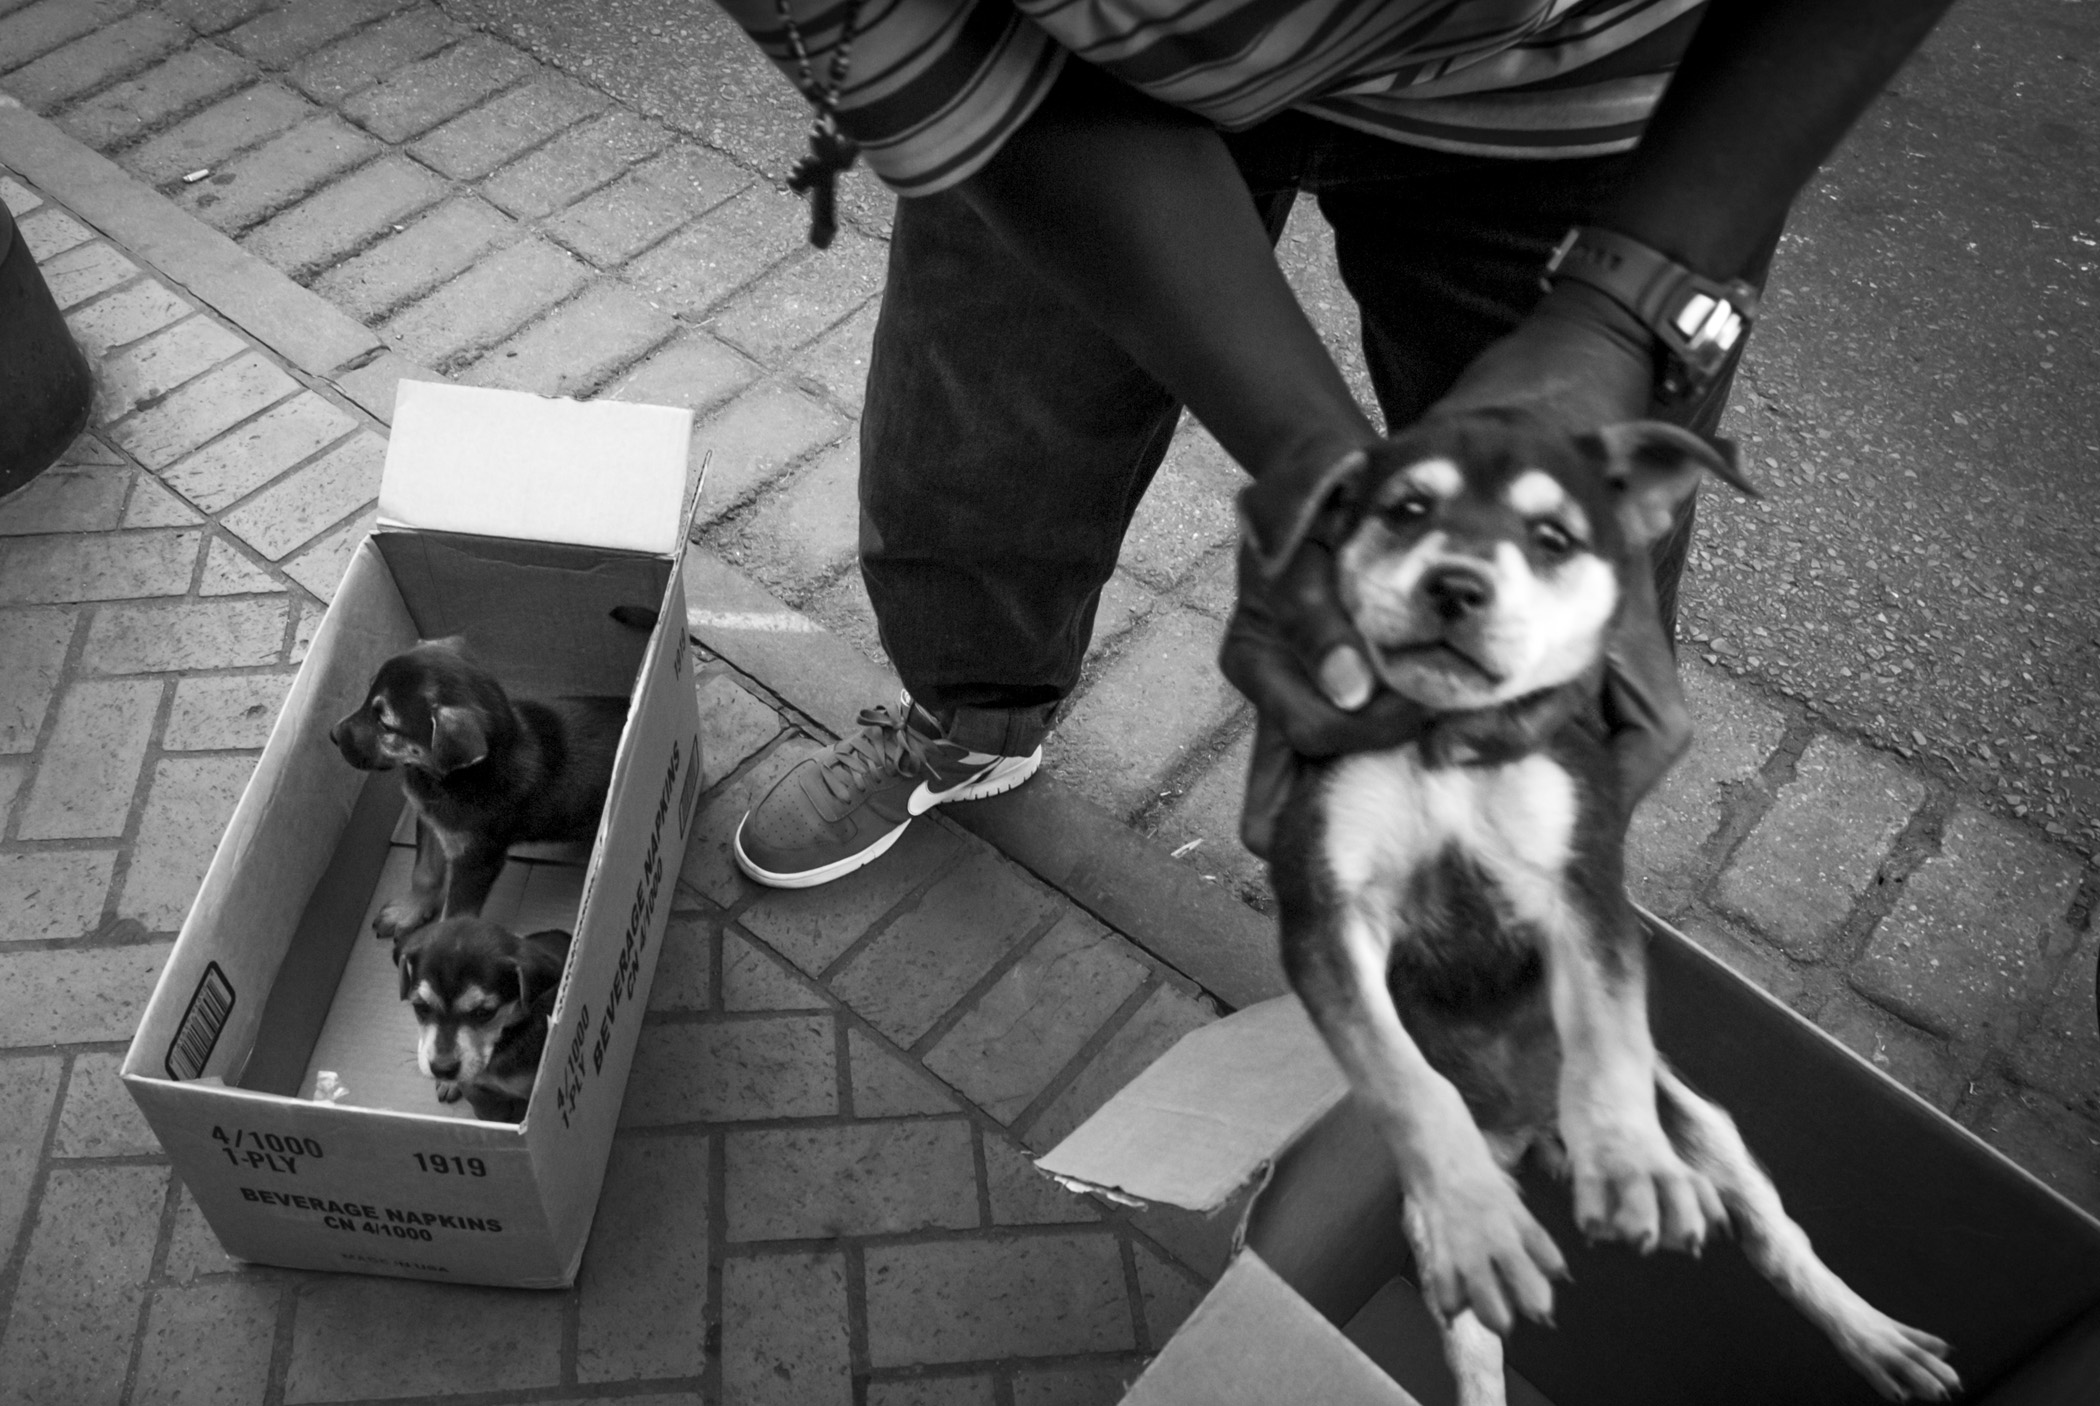  Moving puppies that were for for sale from one box to a larger one Bourbon Street, New Orleans, 2010    3:2  